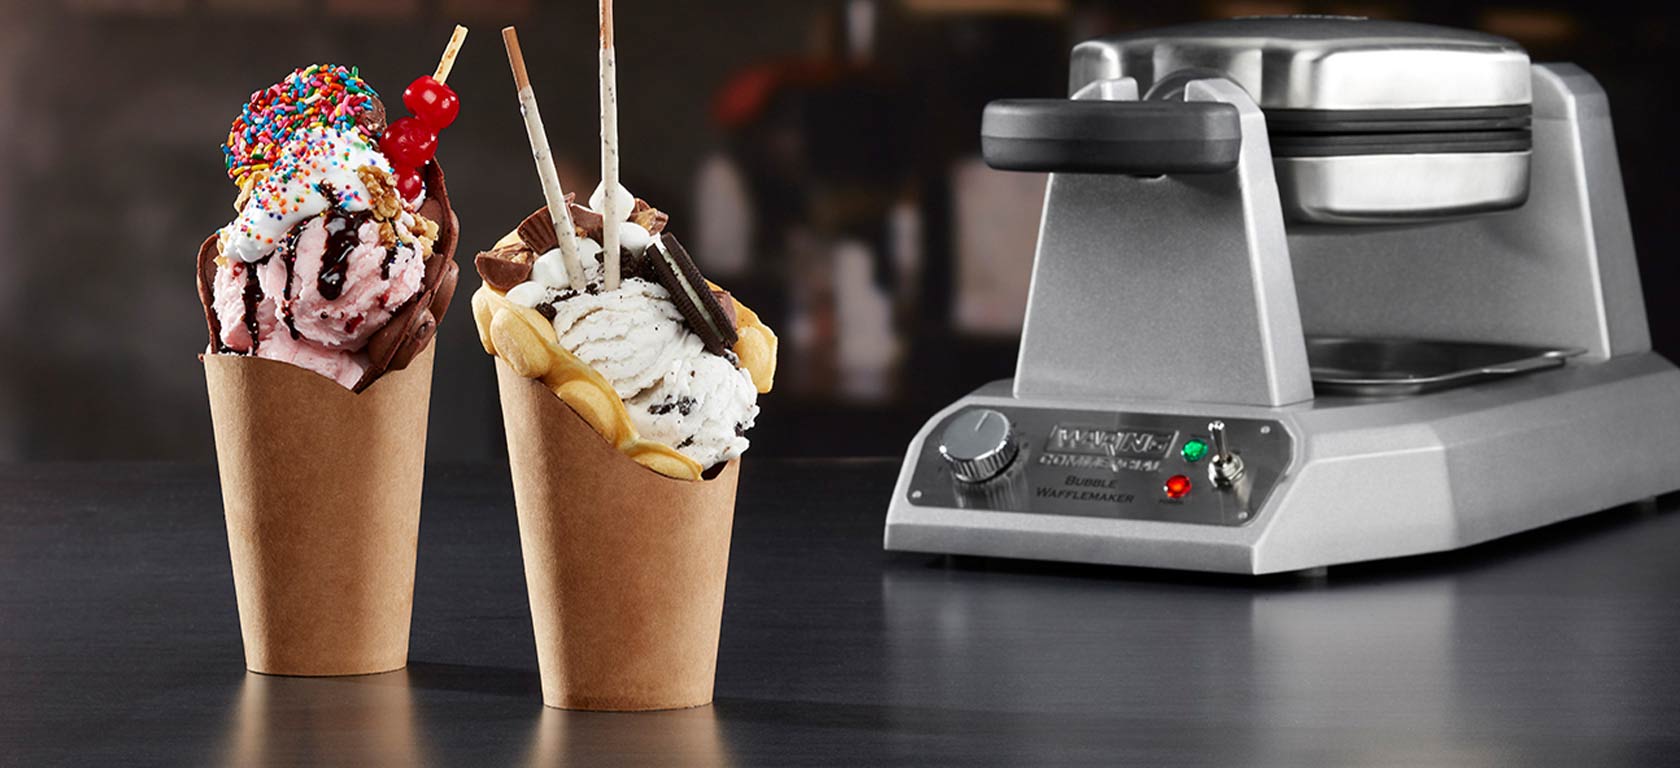 Silver Waring waffle maker in the background with two appetizing waffle ice-cram cones in the front.